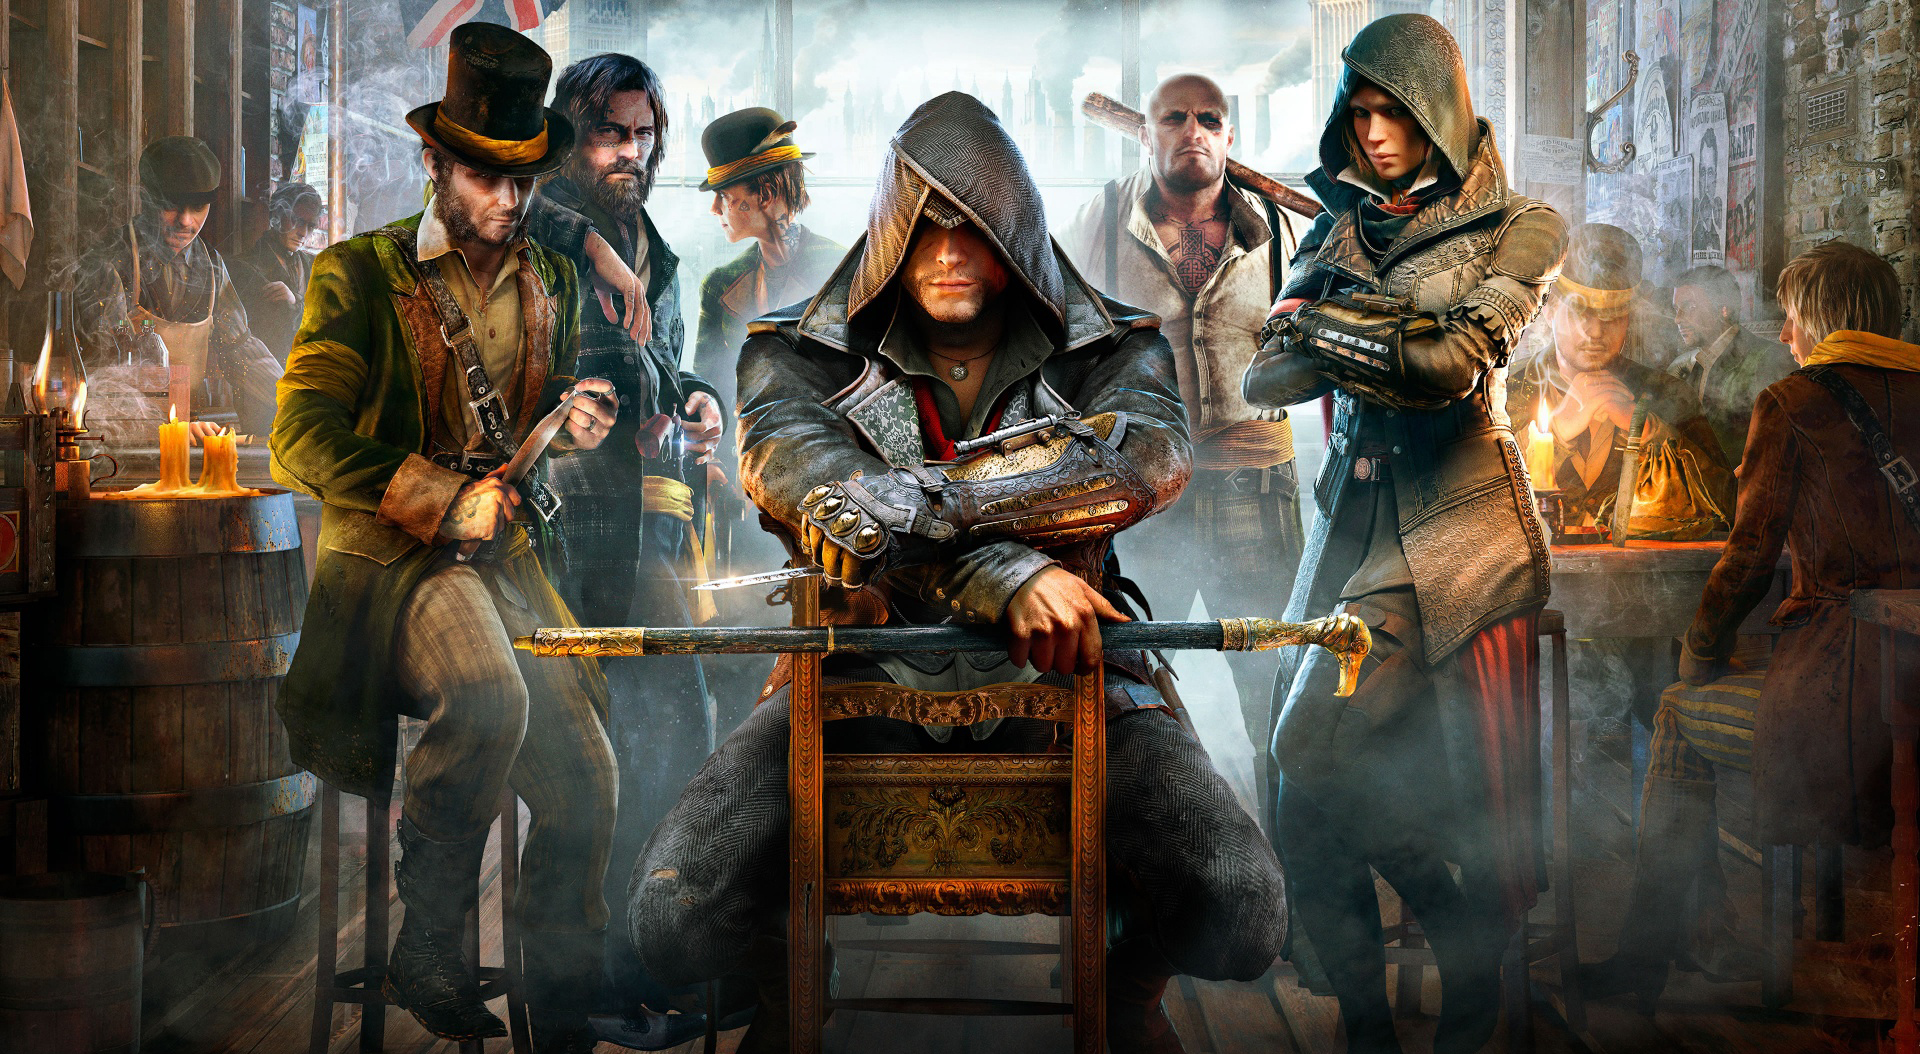 Movie Wallpapers - Assassin's Creed Syndicate Wallpaper 4k - HD Wallpaper 